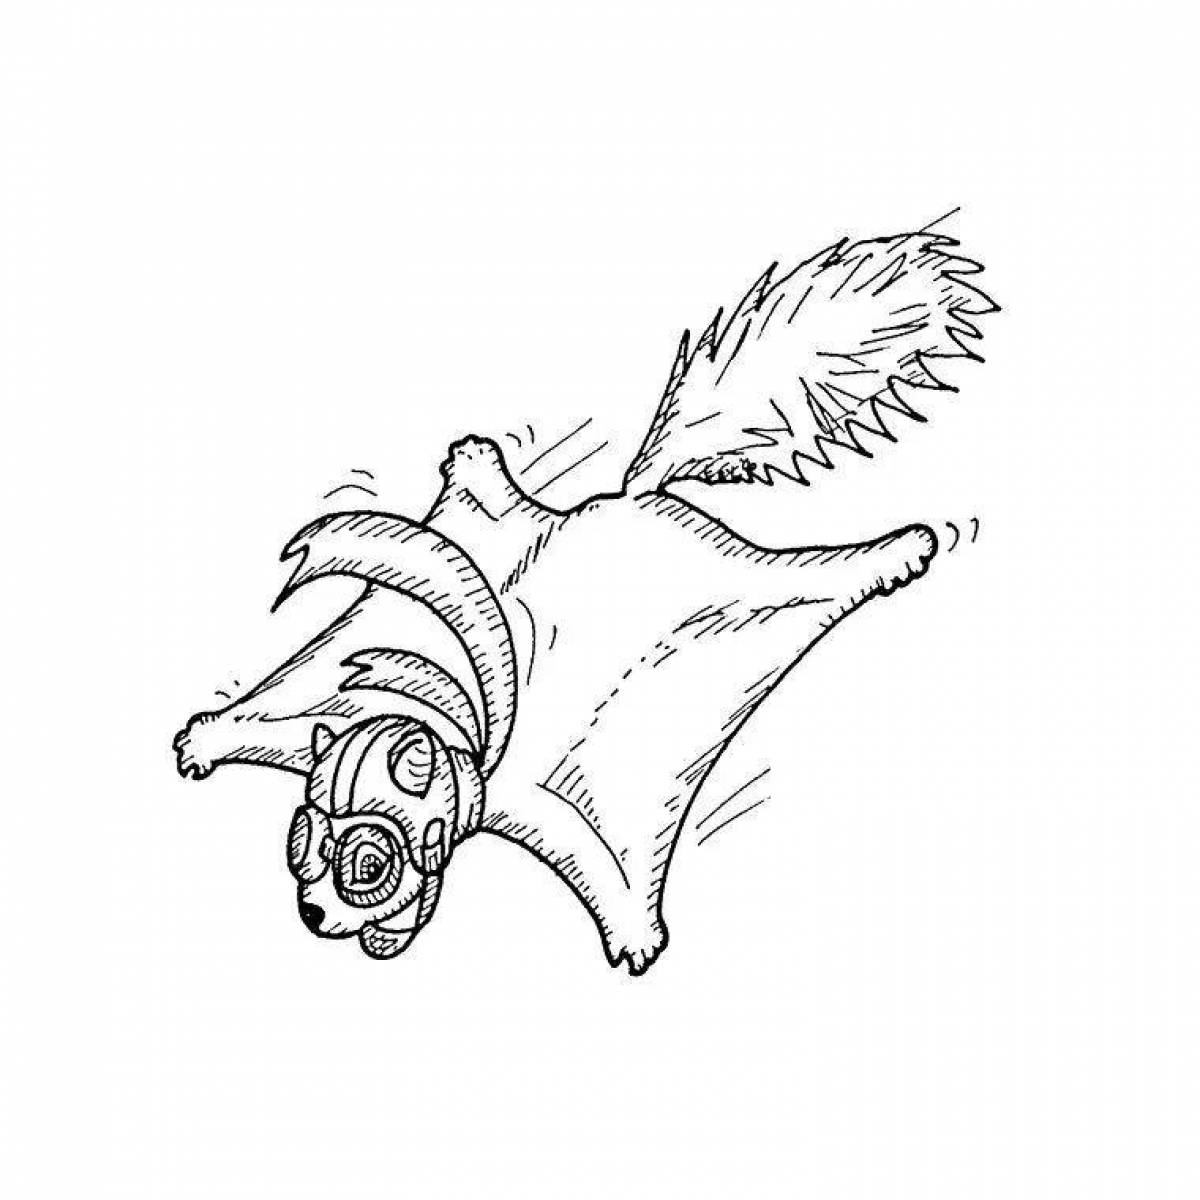 Flying squirrel bright coloring